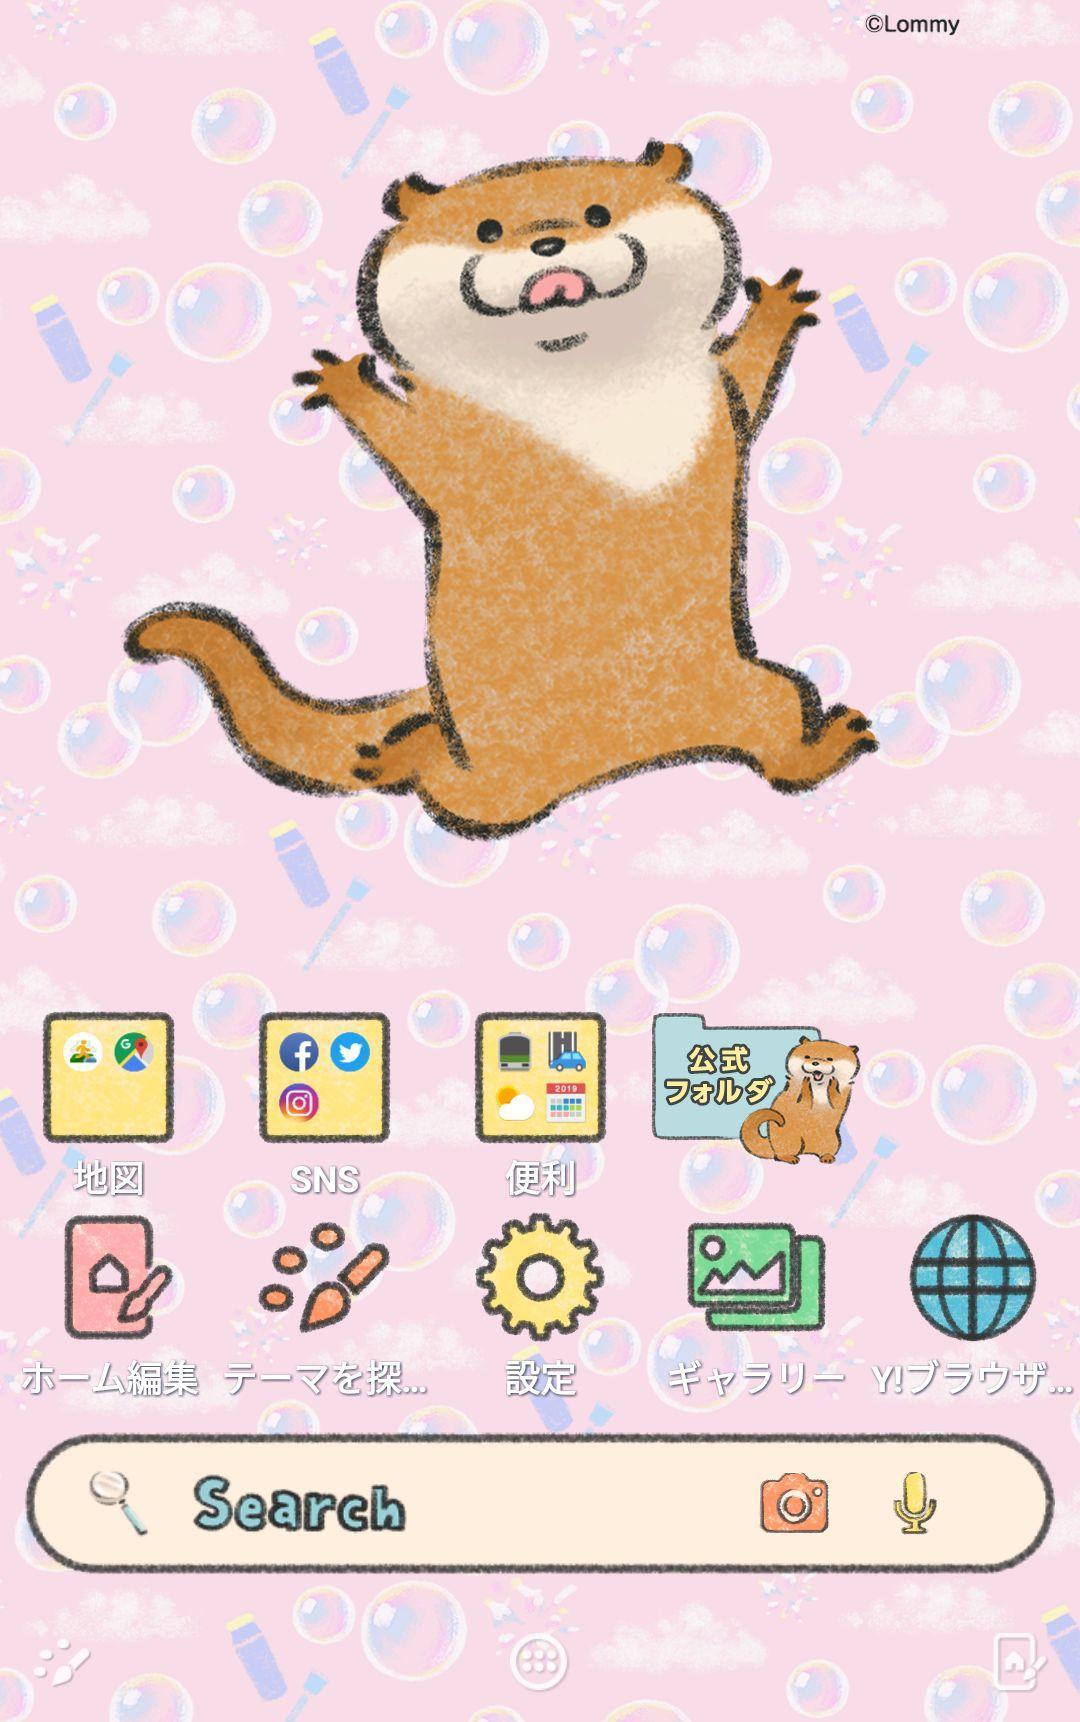 Lommy 可愛い嘘のカワウソ 壁紙きせかえ For Android Apk Download